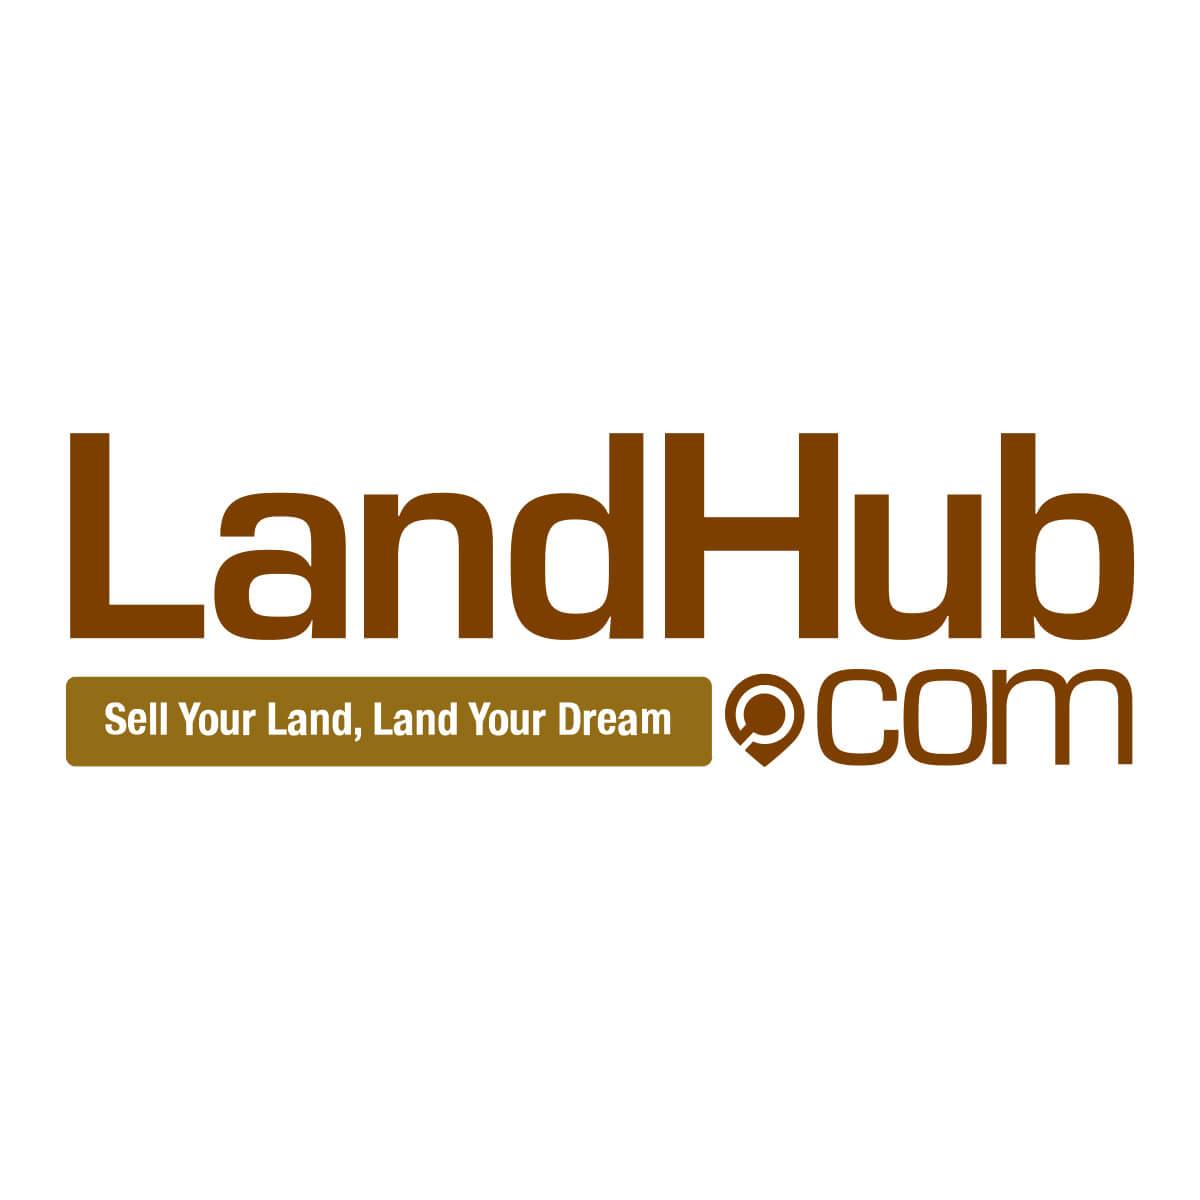 improving land - septic systems